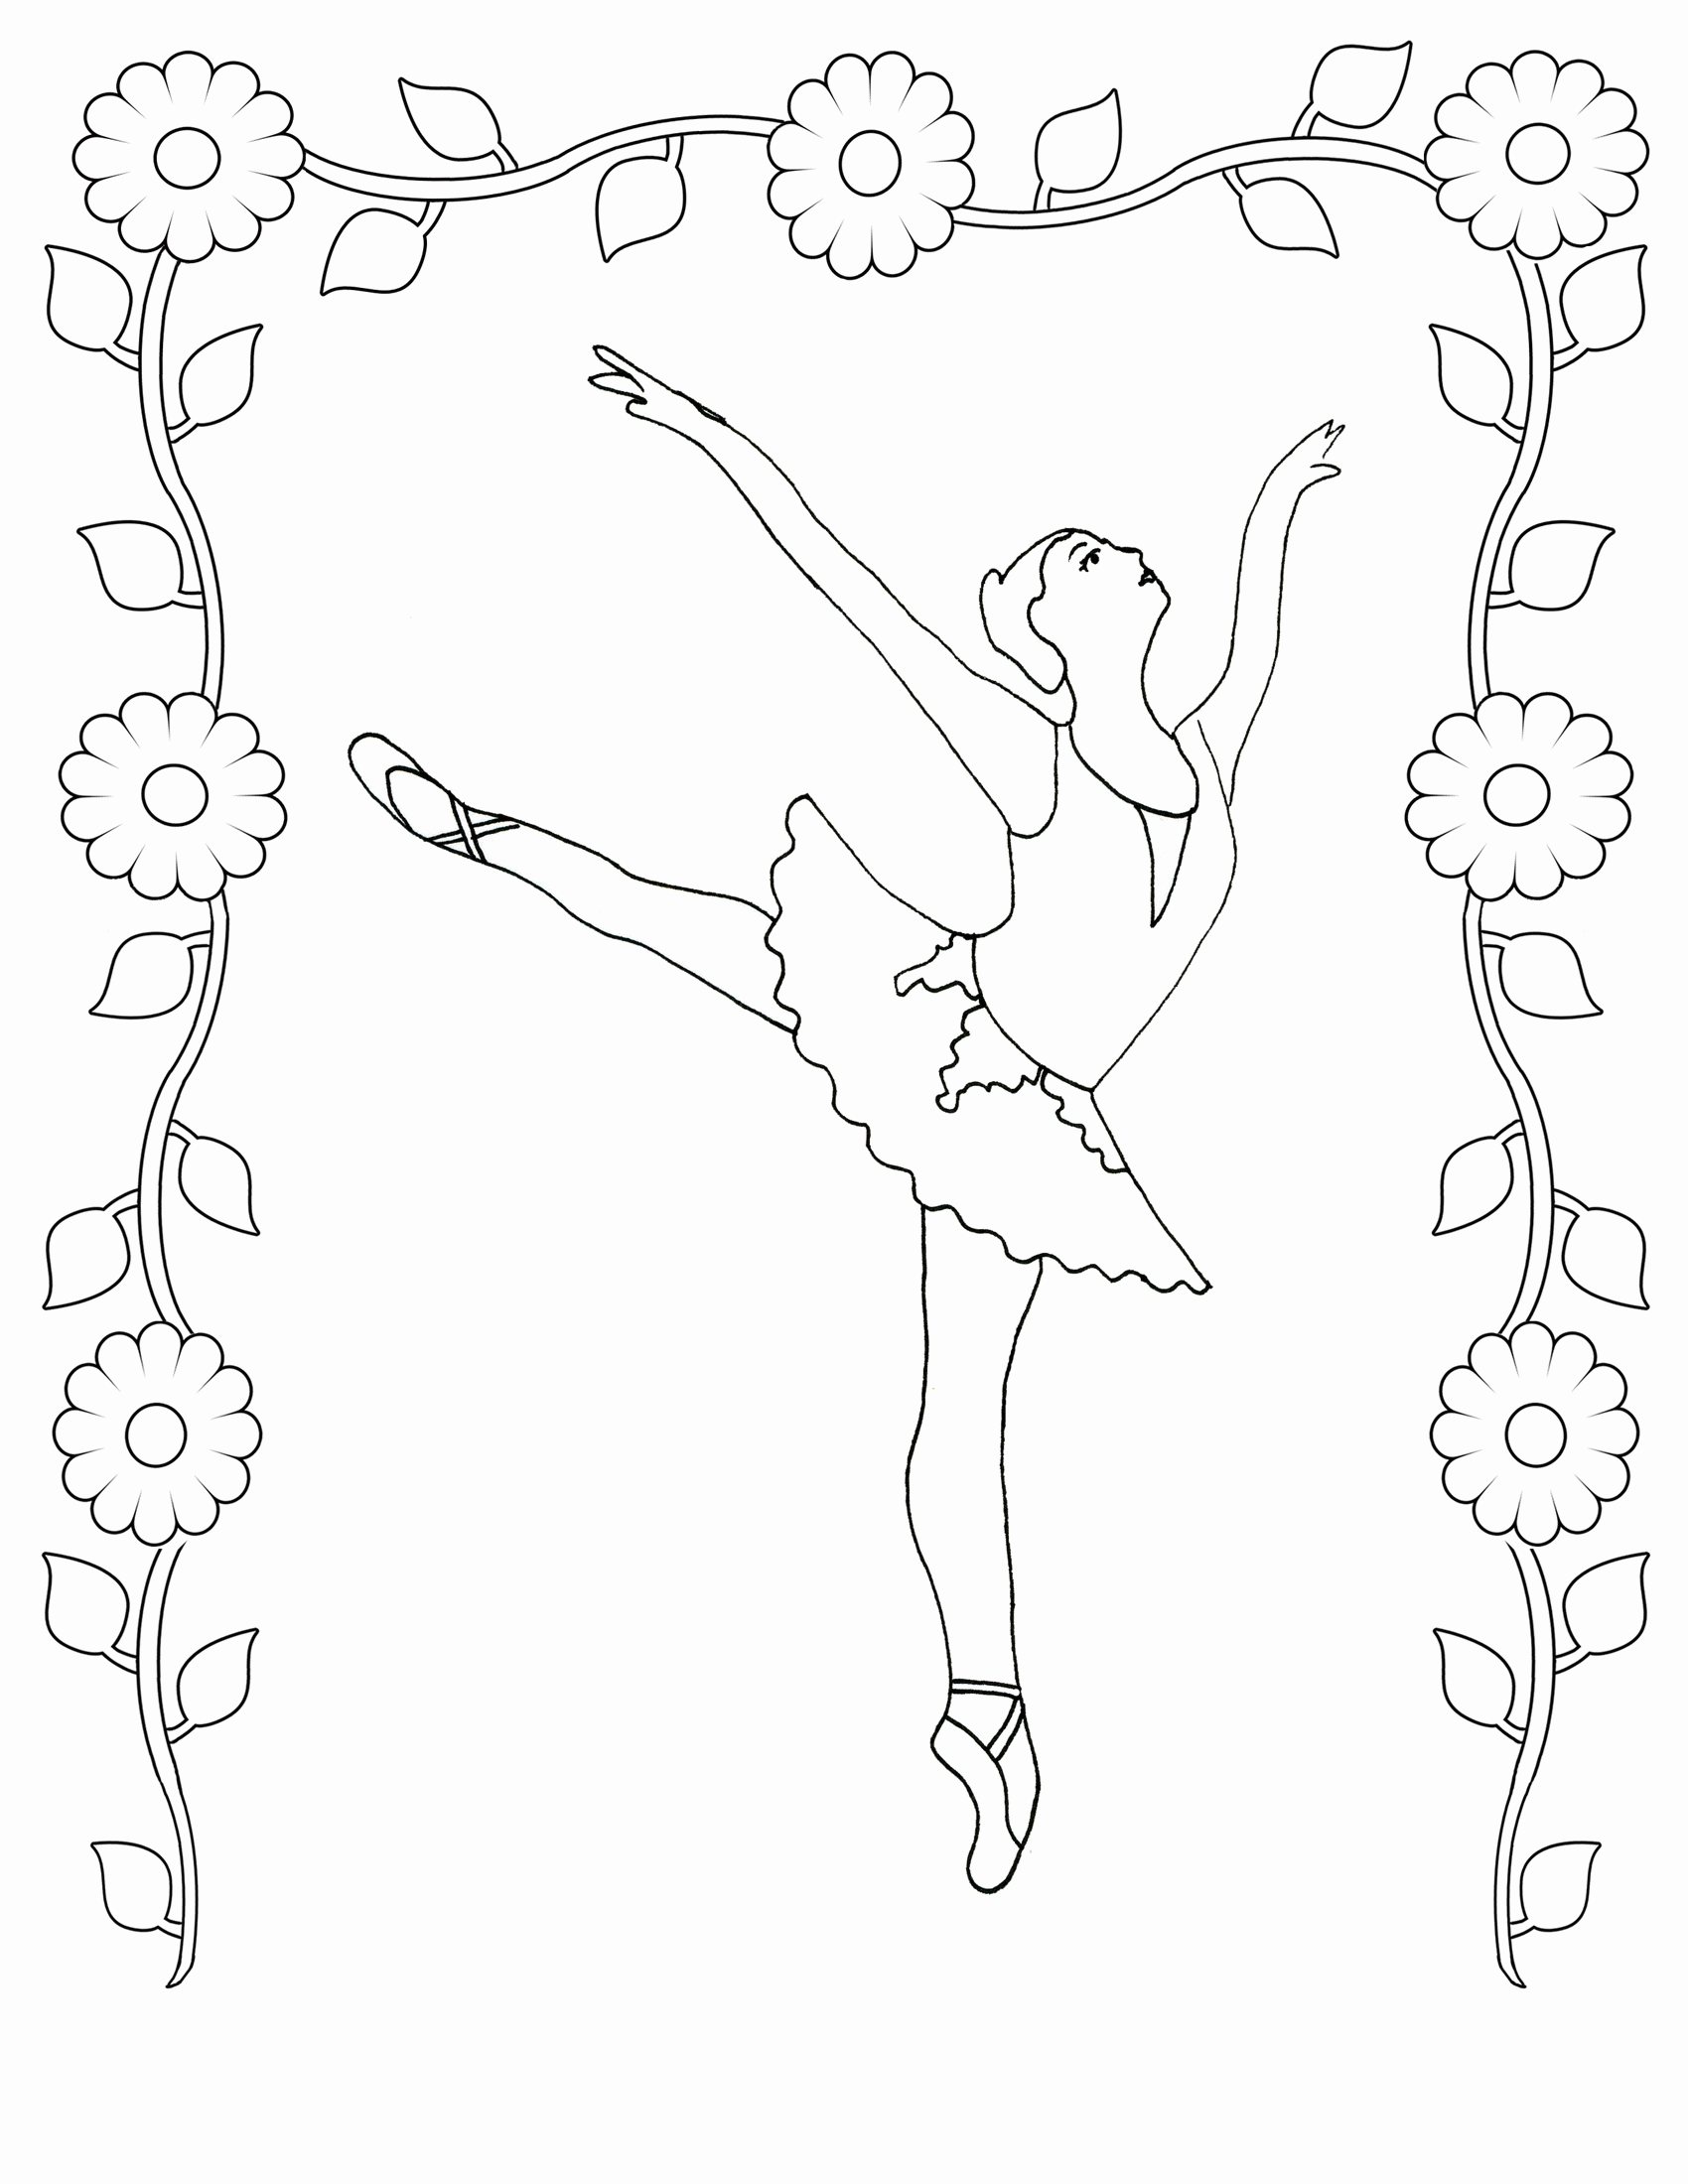 Ballet colouring pictures – Download Free Coloring pages, Free ...